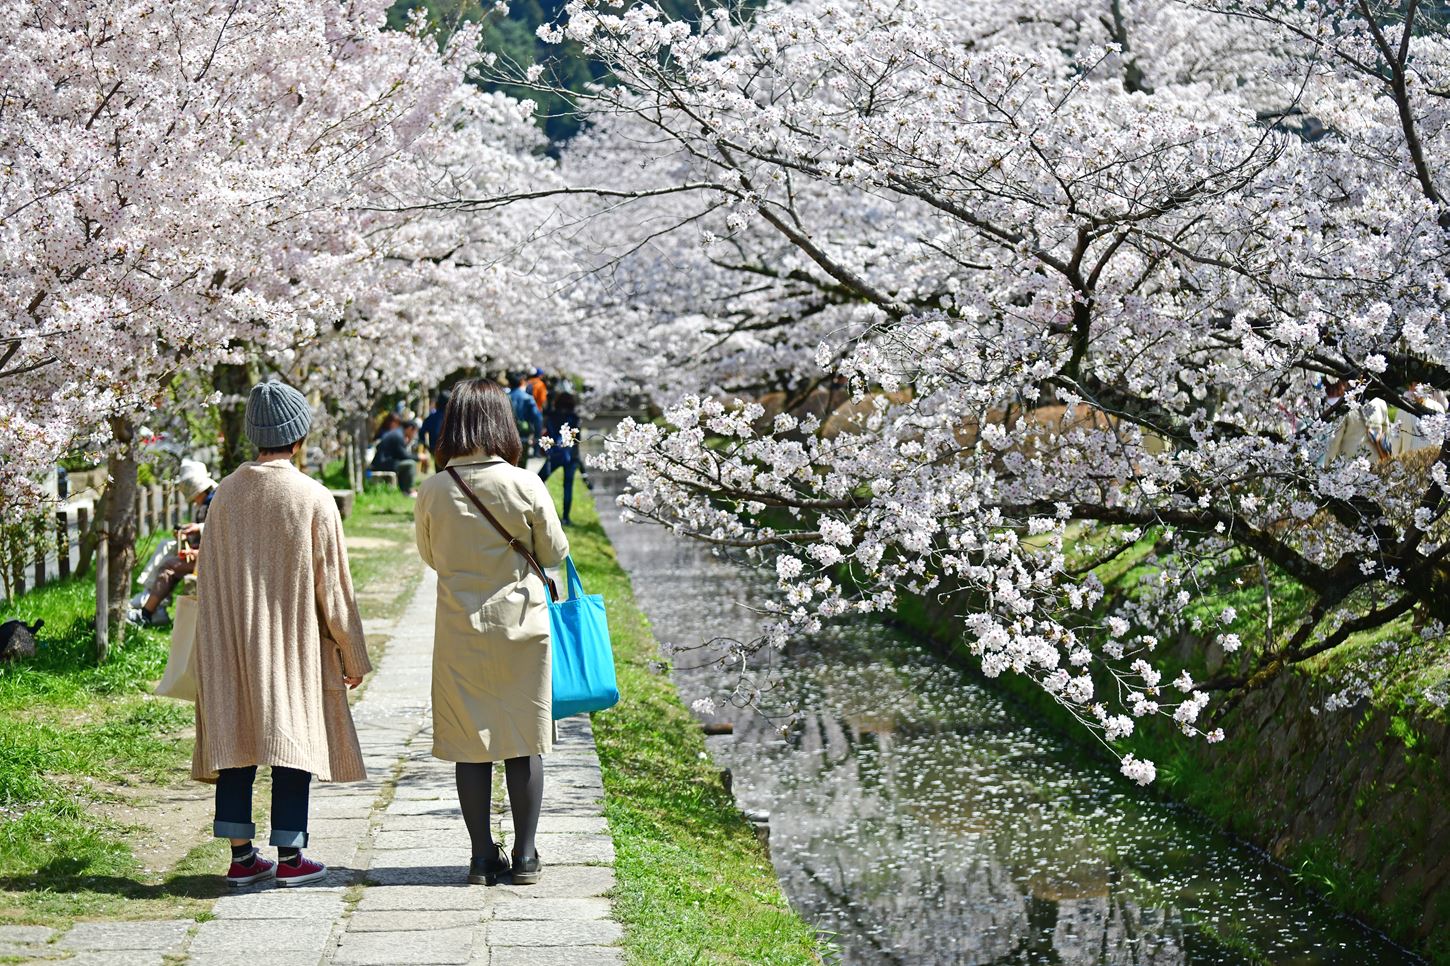 Sightseeing scenery that simply shows the weather in Kyoto in March4